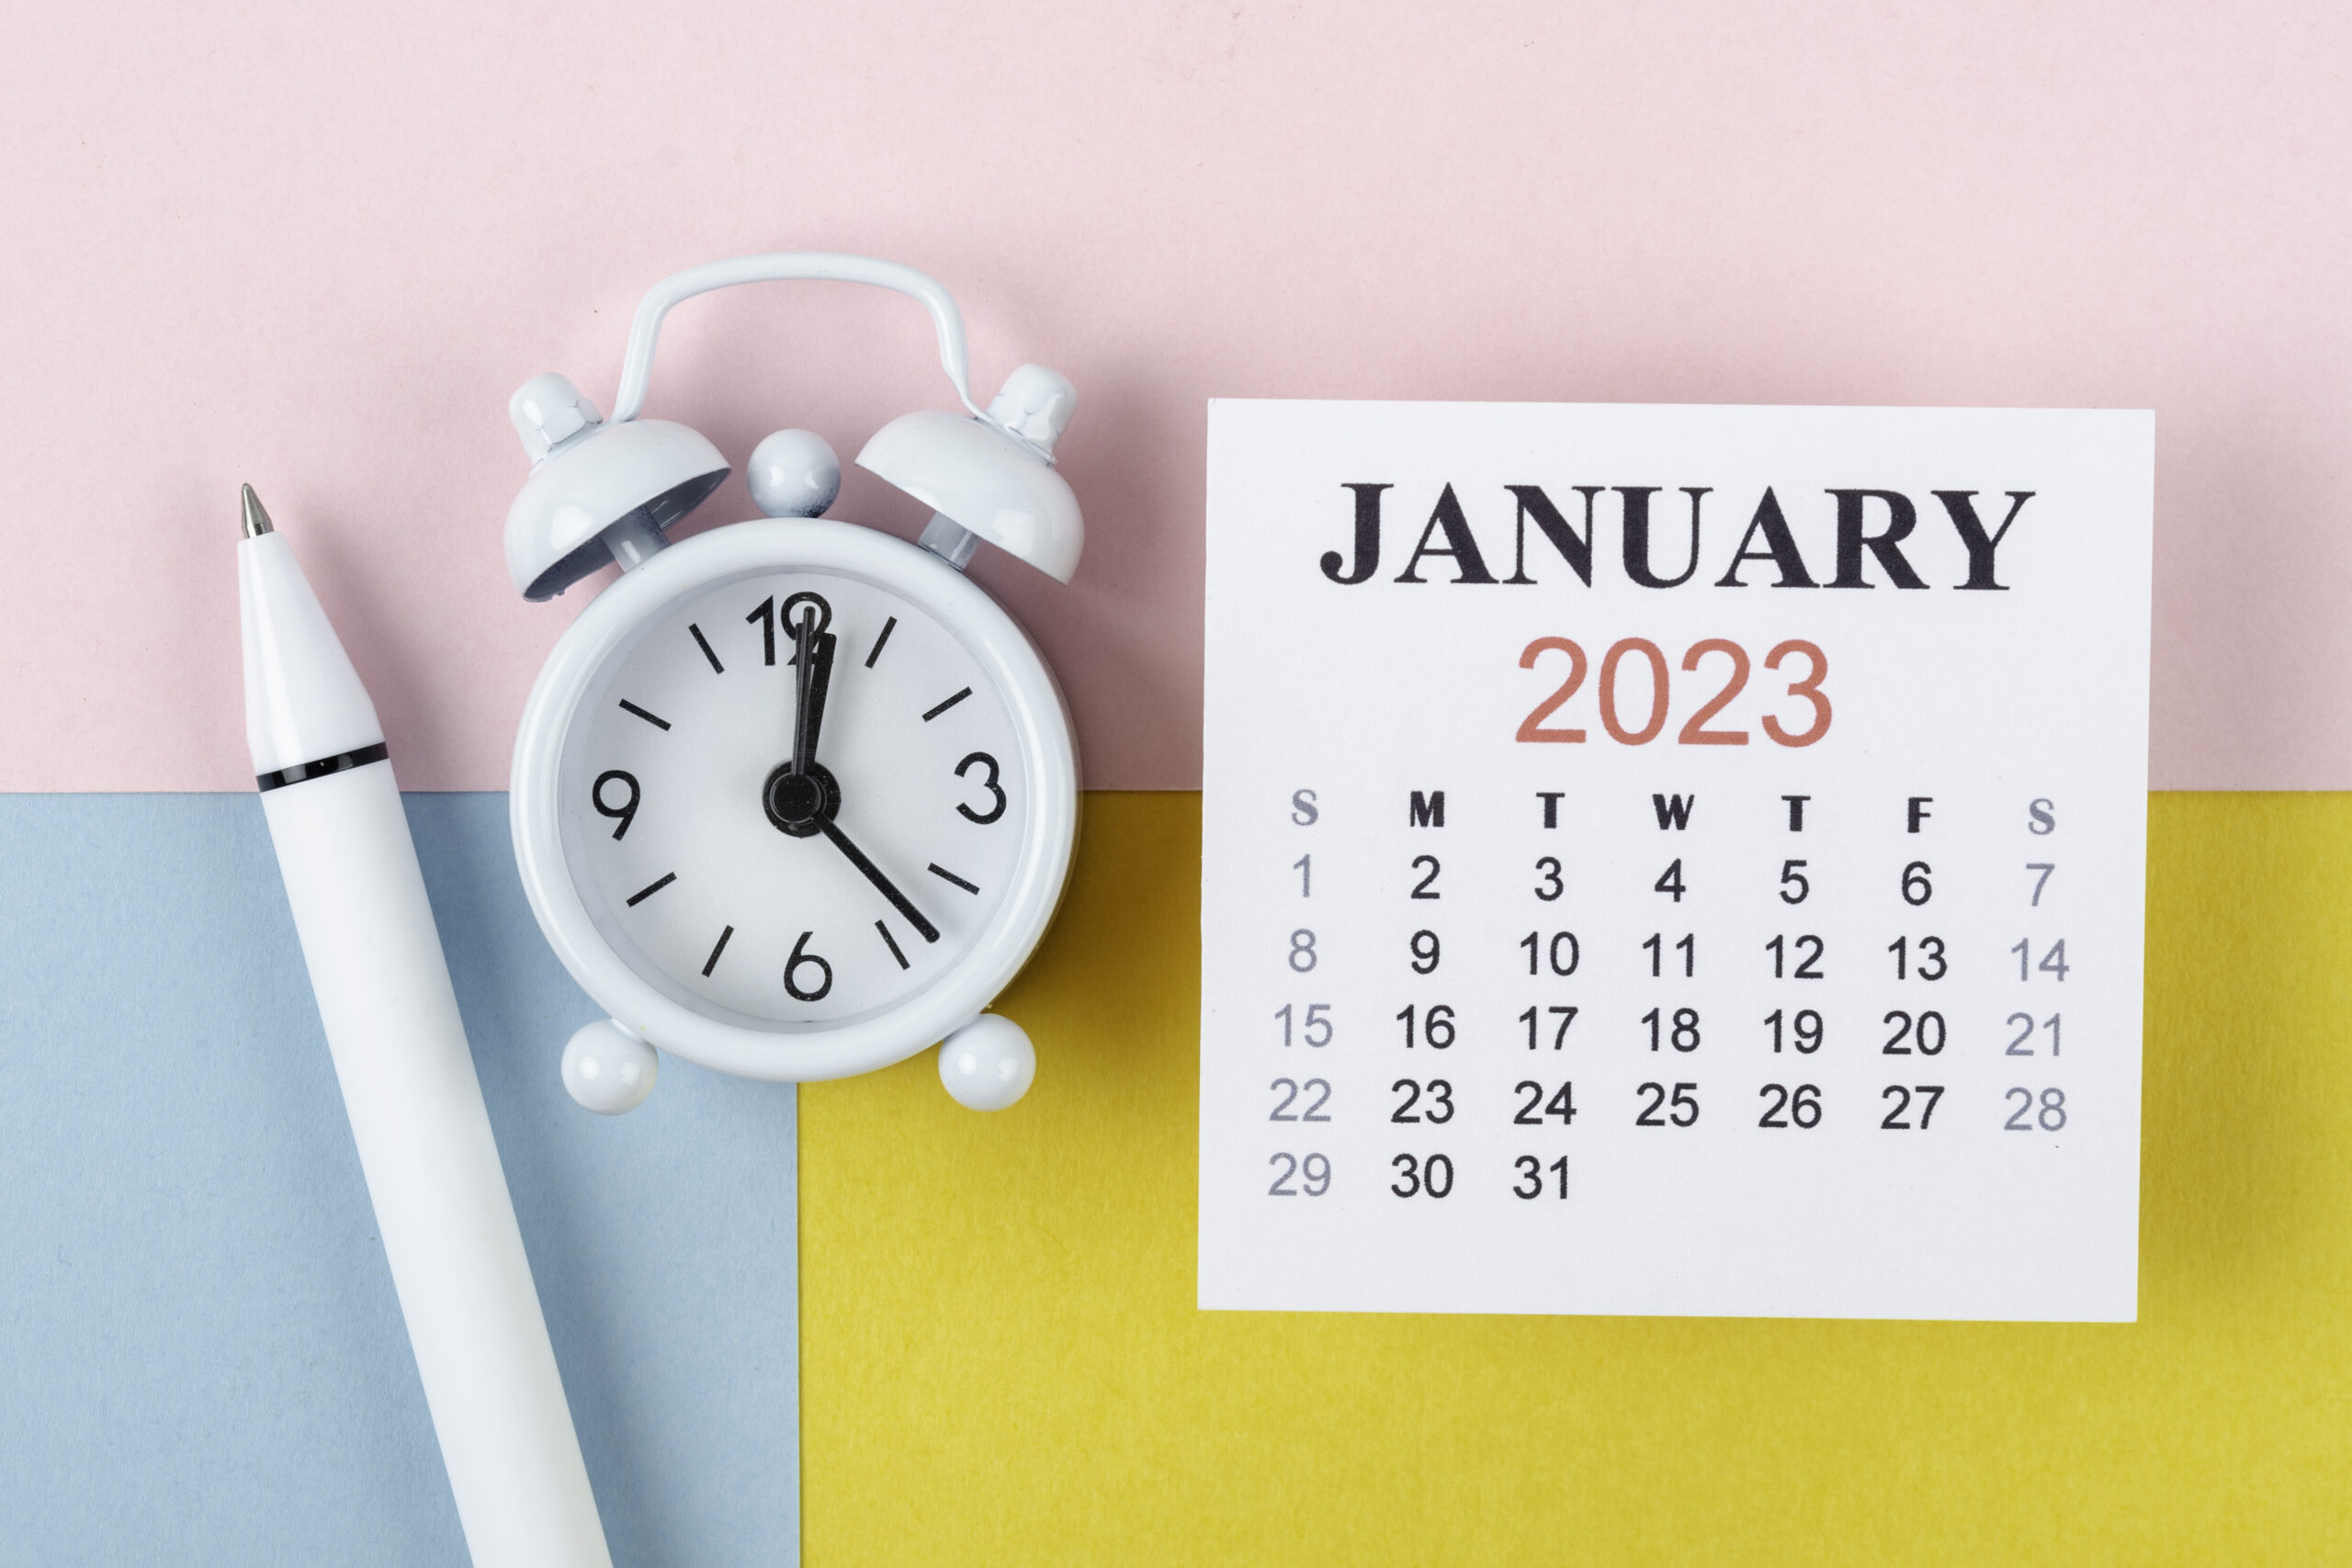 Calendar Desk 2023: January is the month for the organizer to plan and deadline with an alarm clock and white pen on a two-tone paper background.